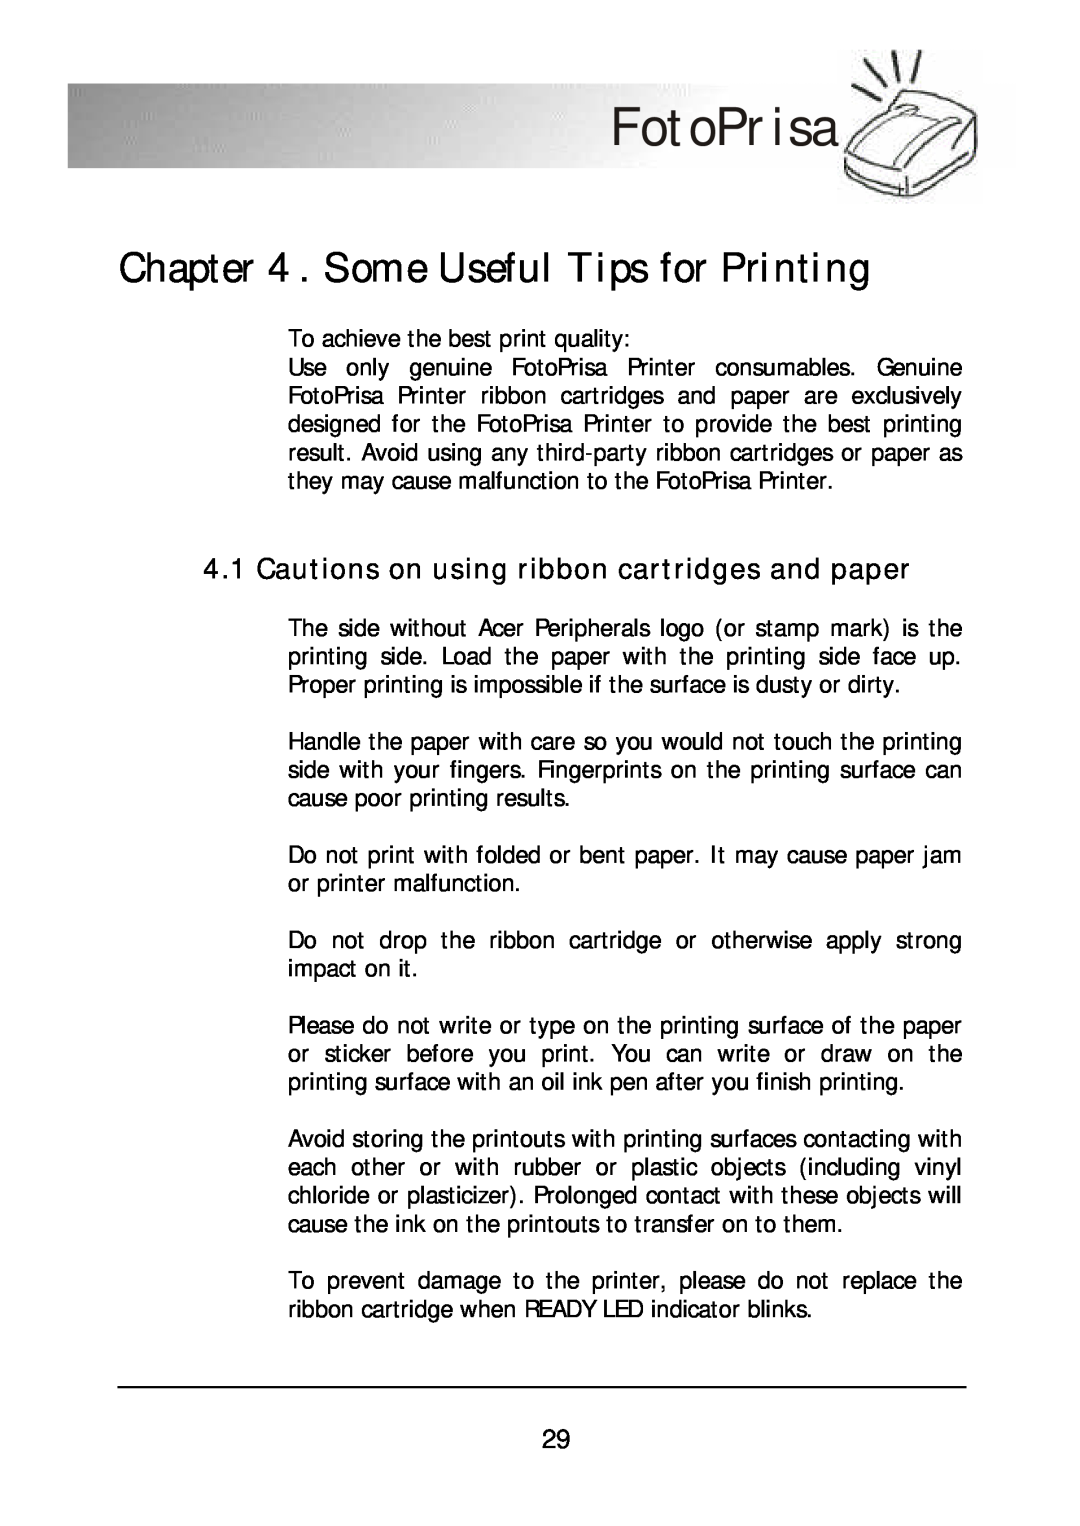 Acer 300P user manual Some Useful Tips for Printing, Cautions on using ribbon cartridges and paper, FotoPrisa 